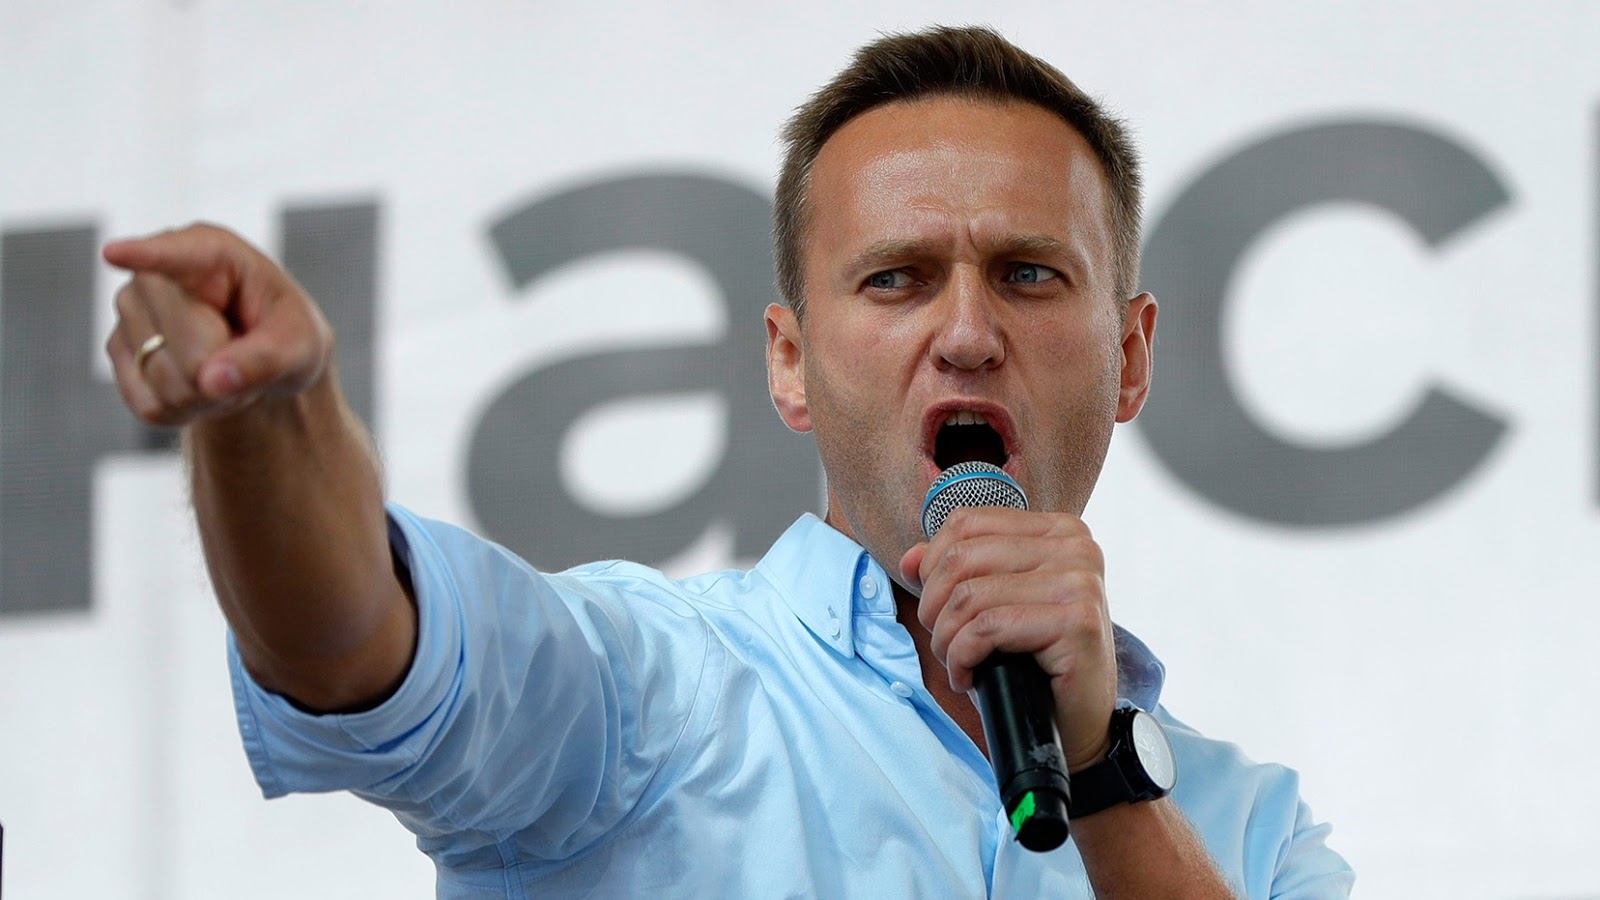 Russian police rule out Navalny poisoning, diagnose pancreatitis